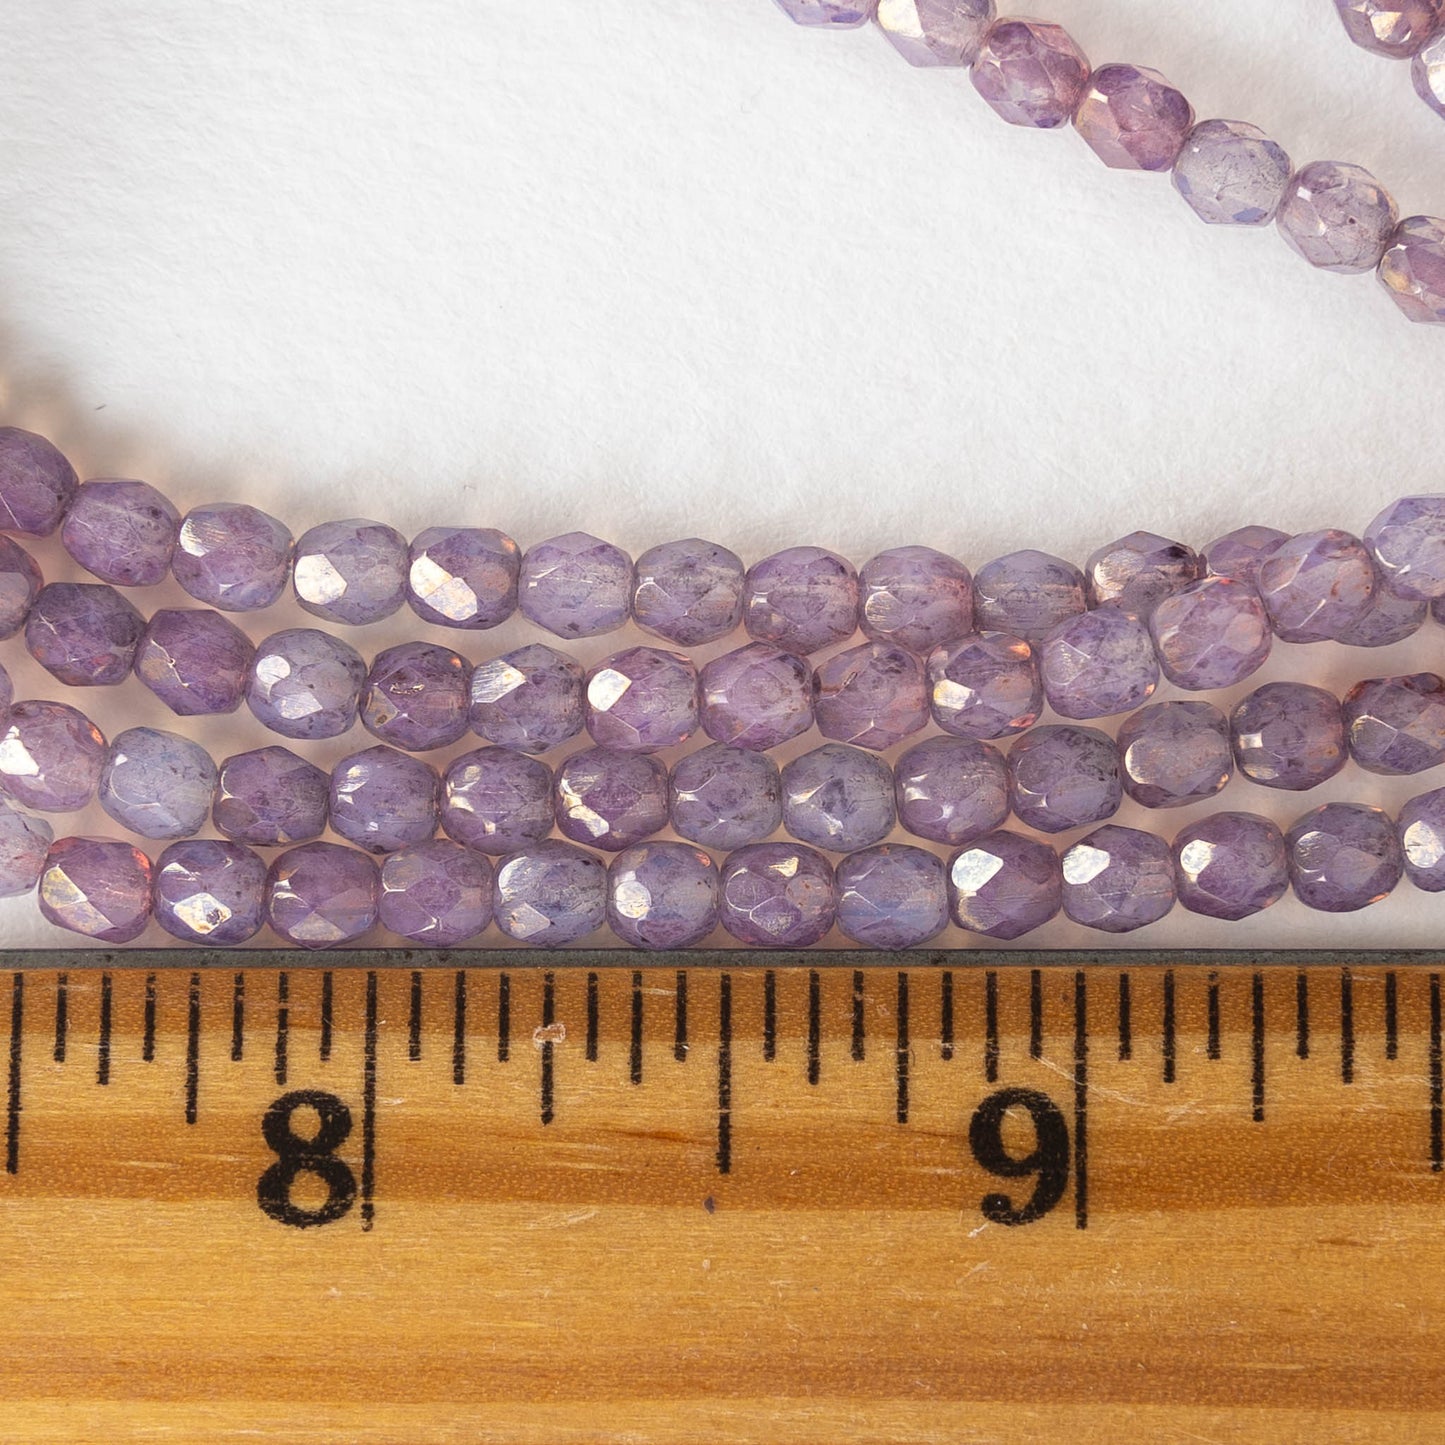 4mm Faceted Round Beads - Semi-opaque Thistle - 50 beads